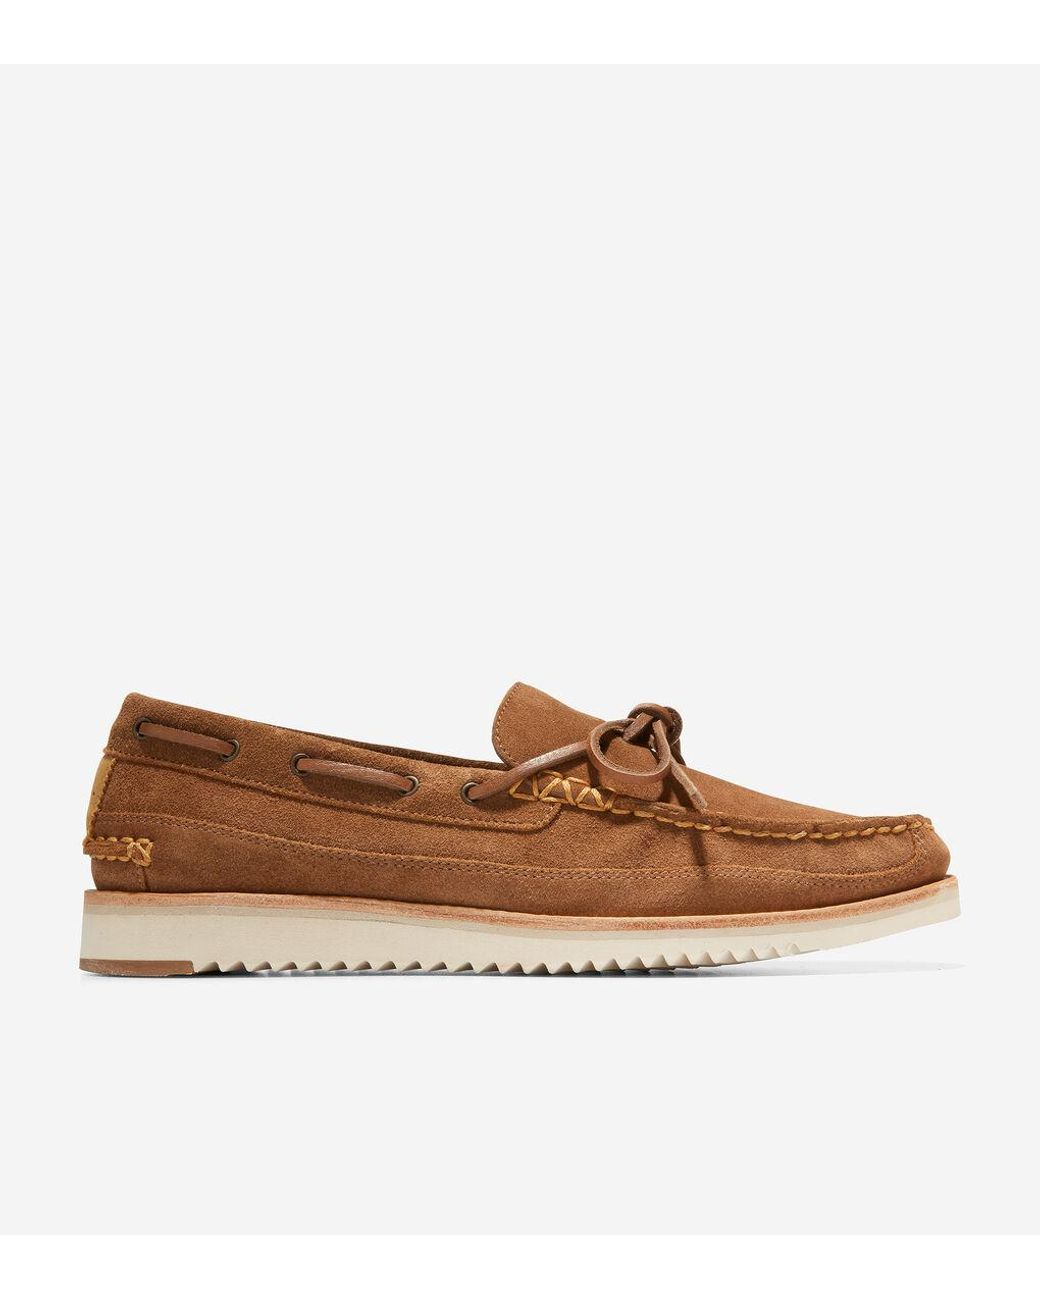 Cole Haan Rubber Pinch Rugged Camp Moccasin Loafer in Golden Honey